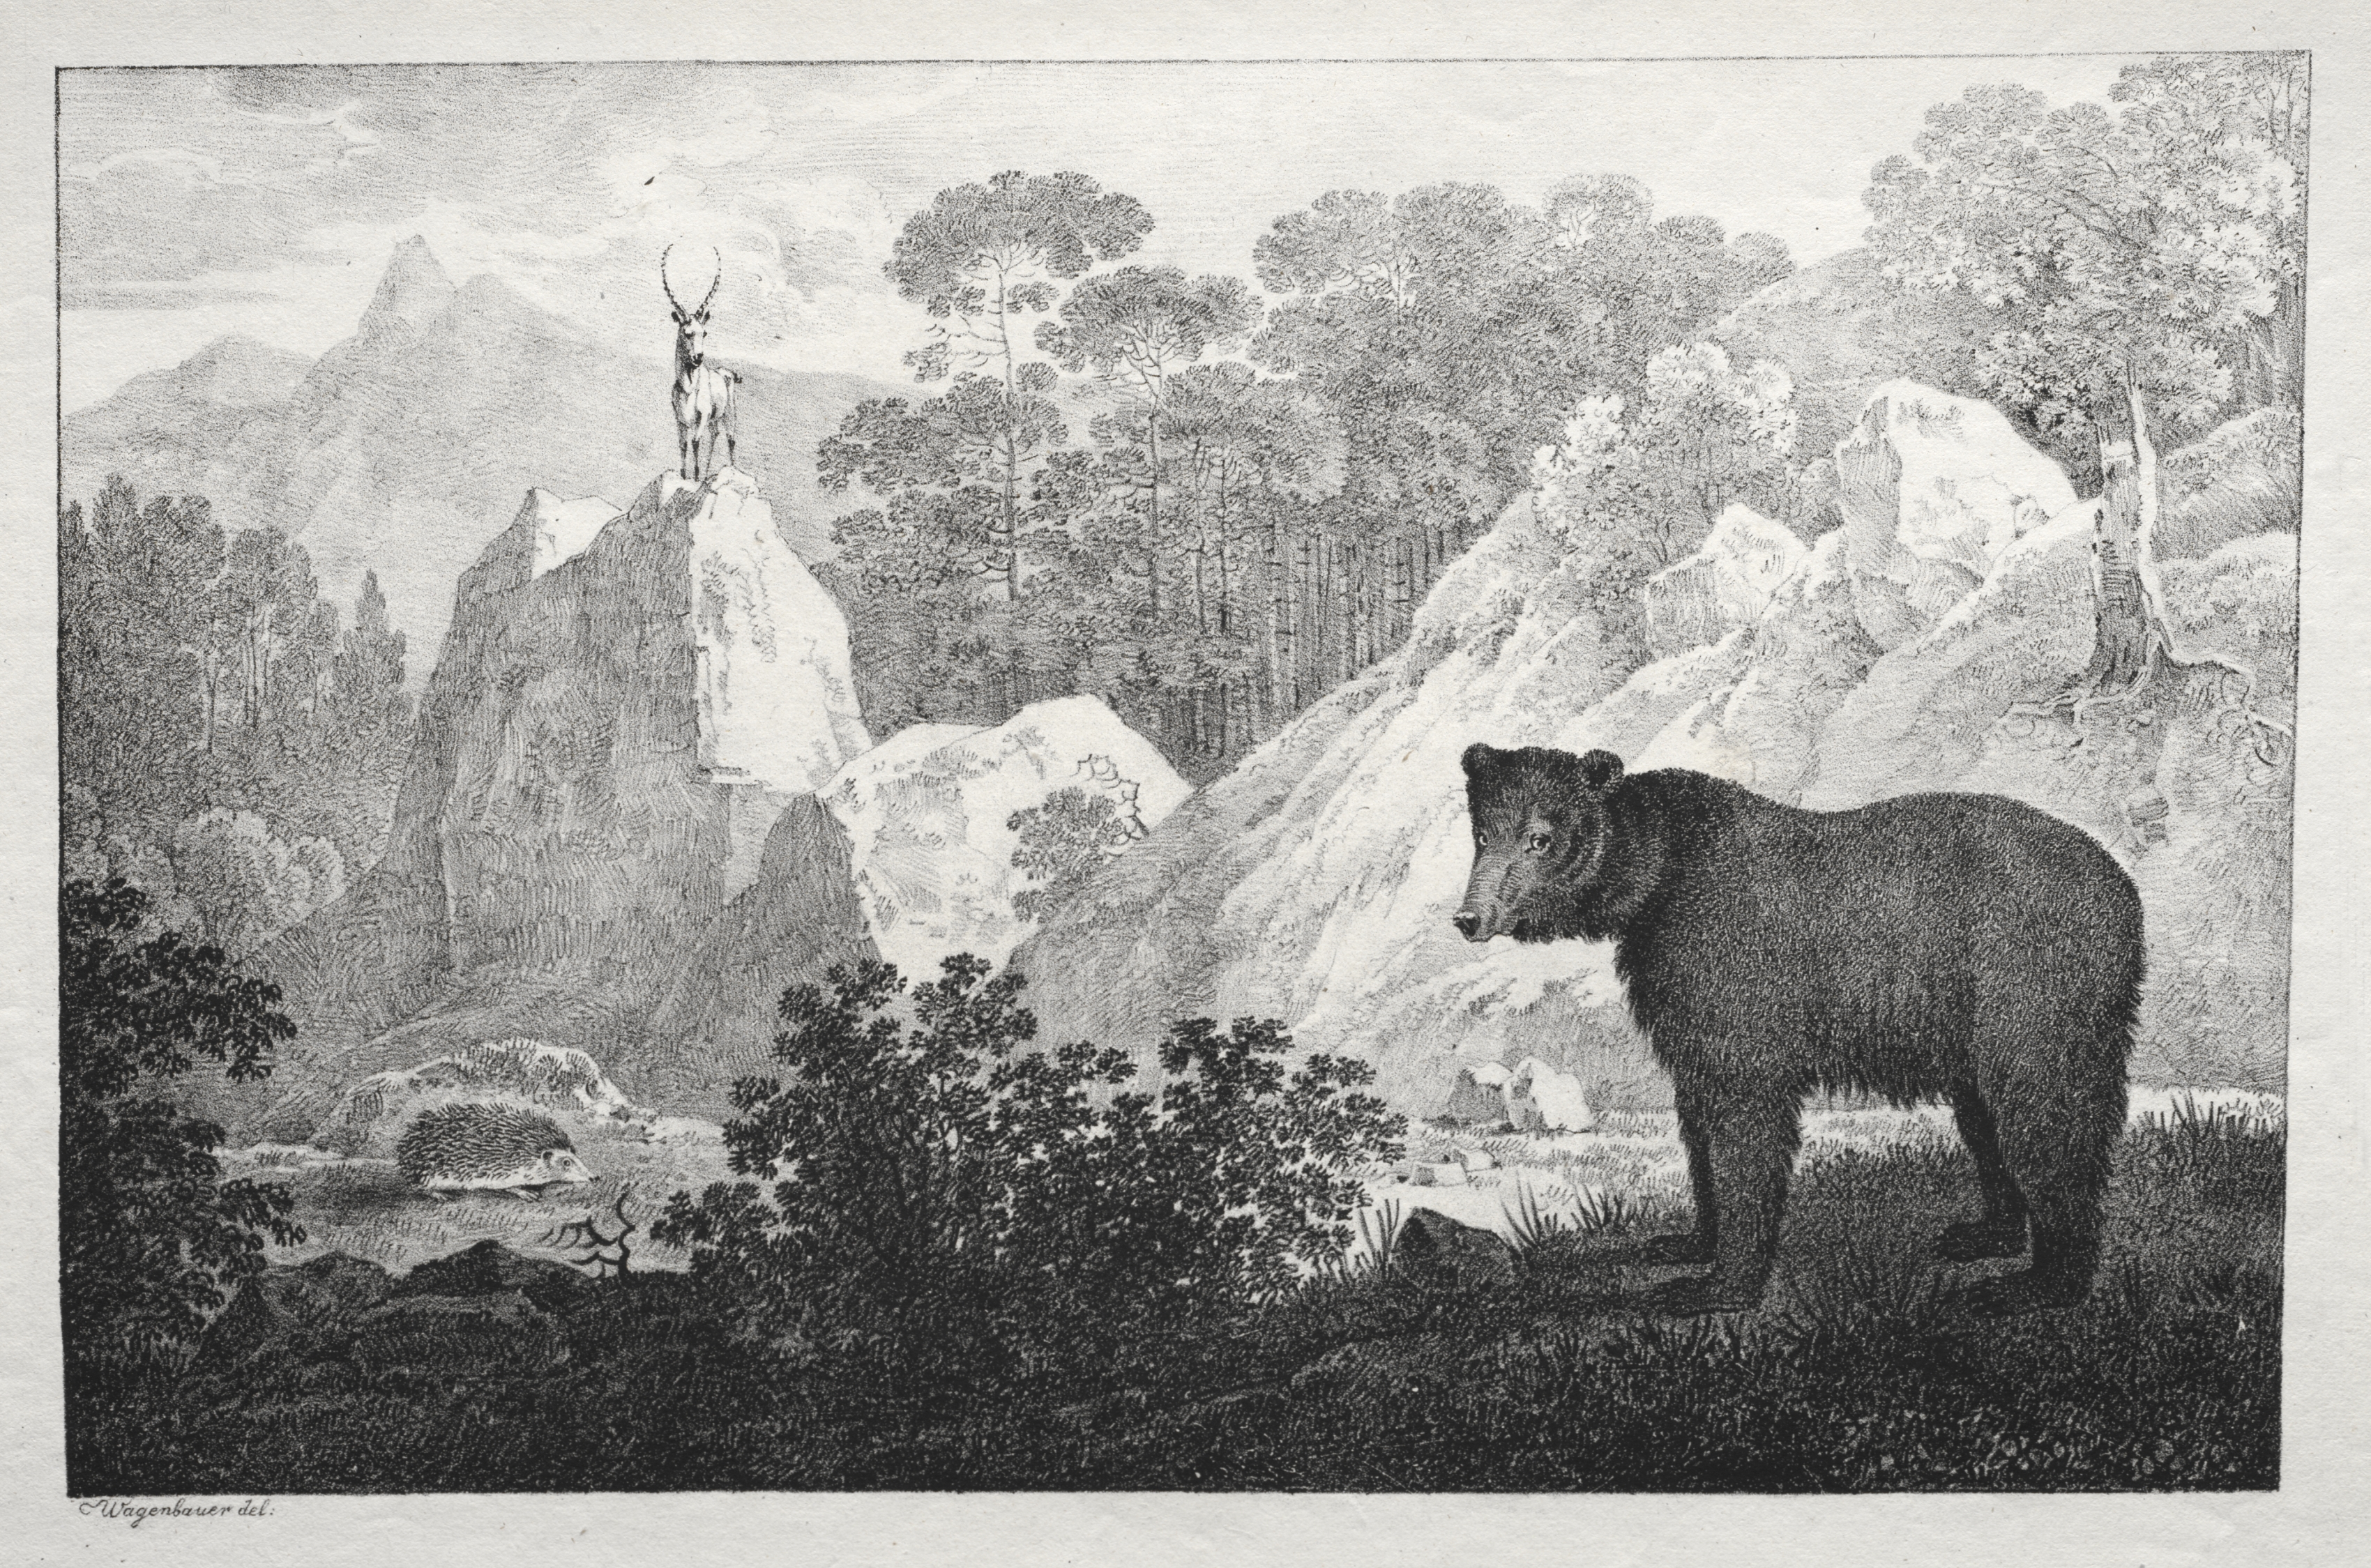 Mountainous Landscape with Bear in the Foreground